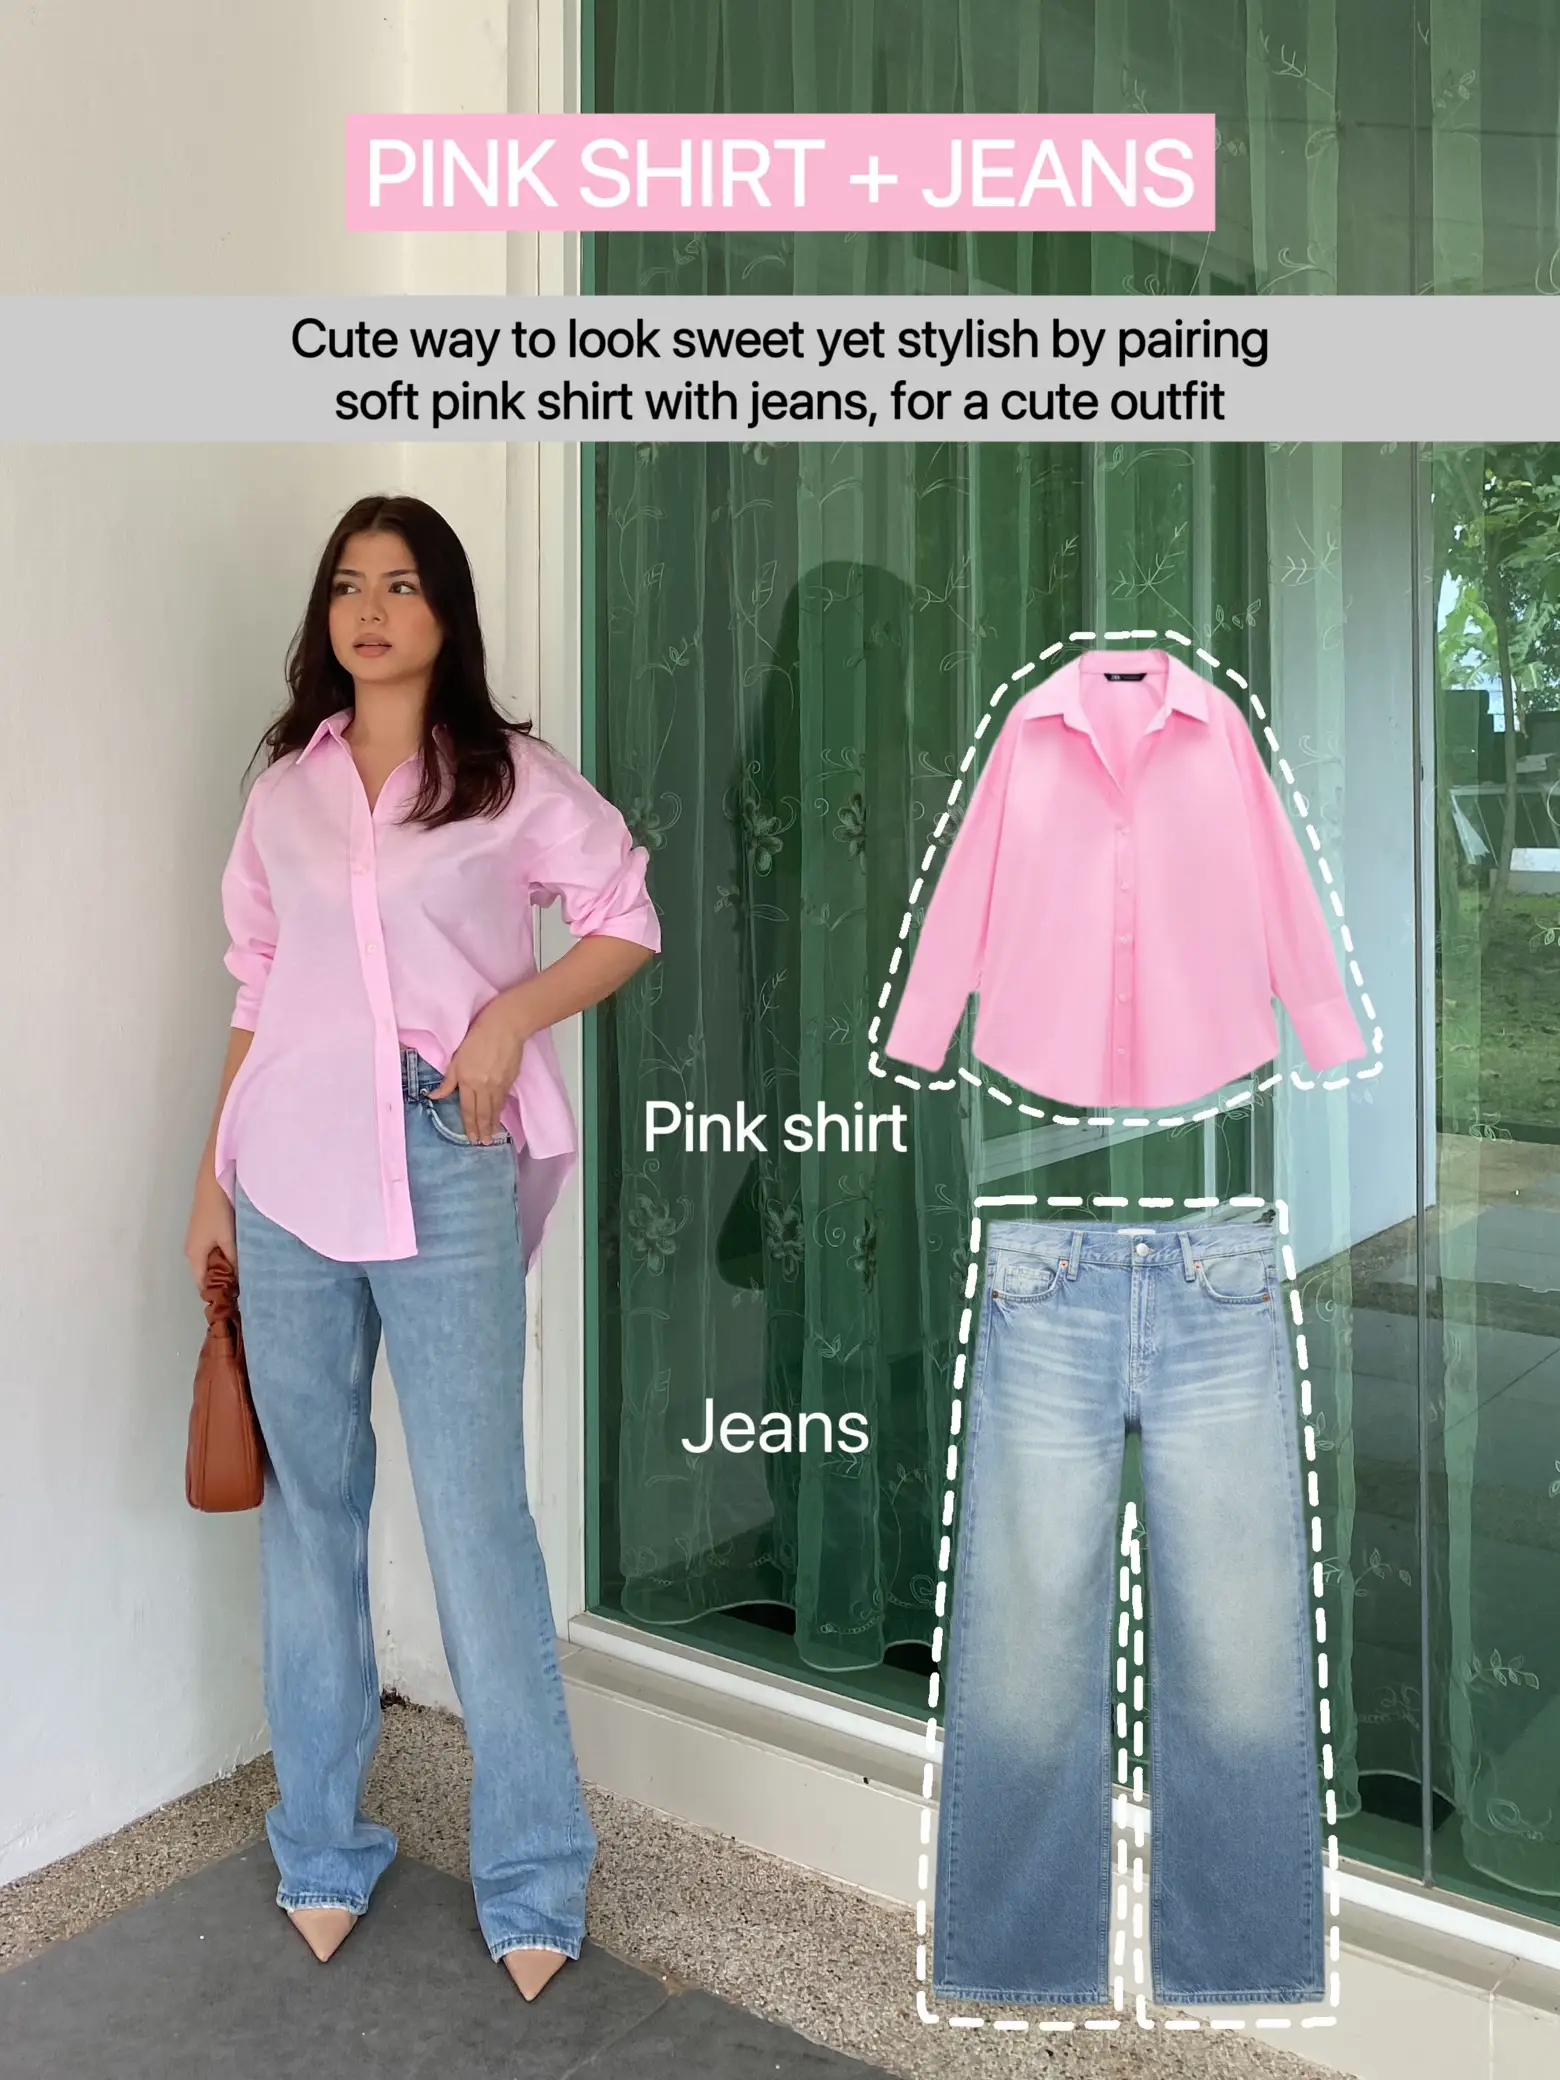 HOW TO STYLE YOUR SHIRT + JEANS TO LOOK STYLISH!